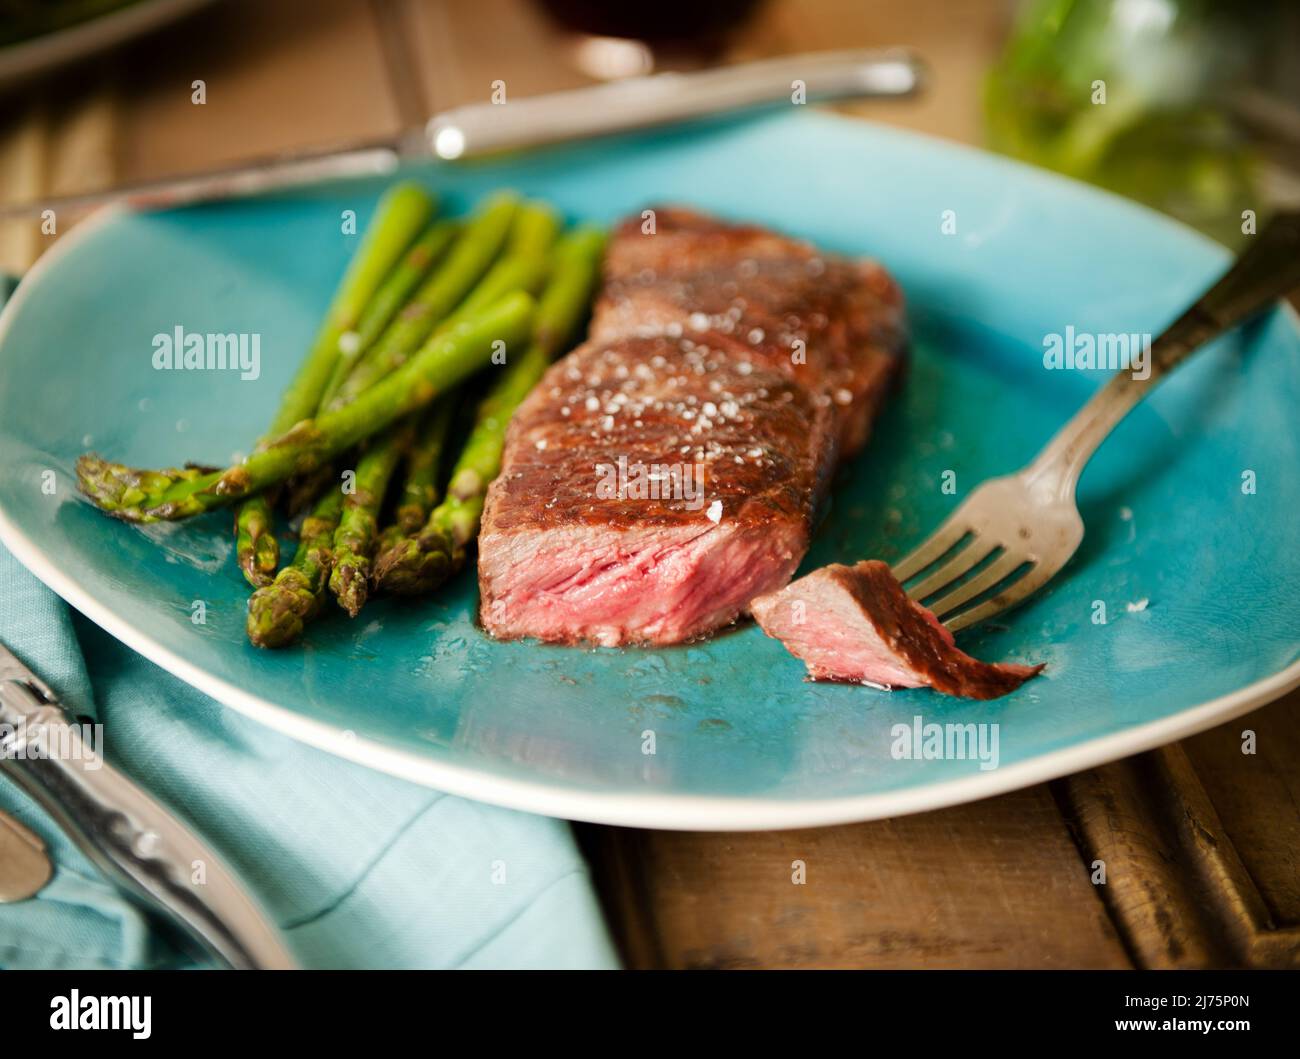 Strip Steak with a Piece Pierced on a Fork; Served with Asparagus on a Blue Plate Stock Photo